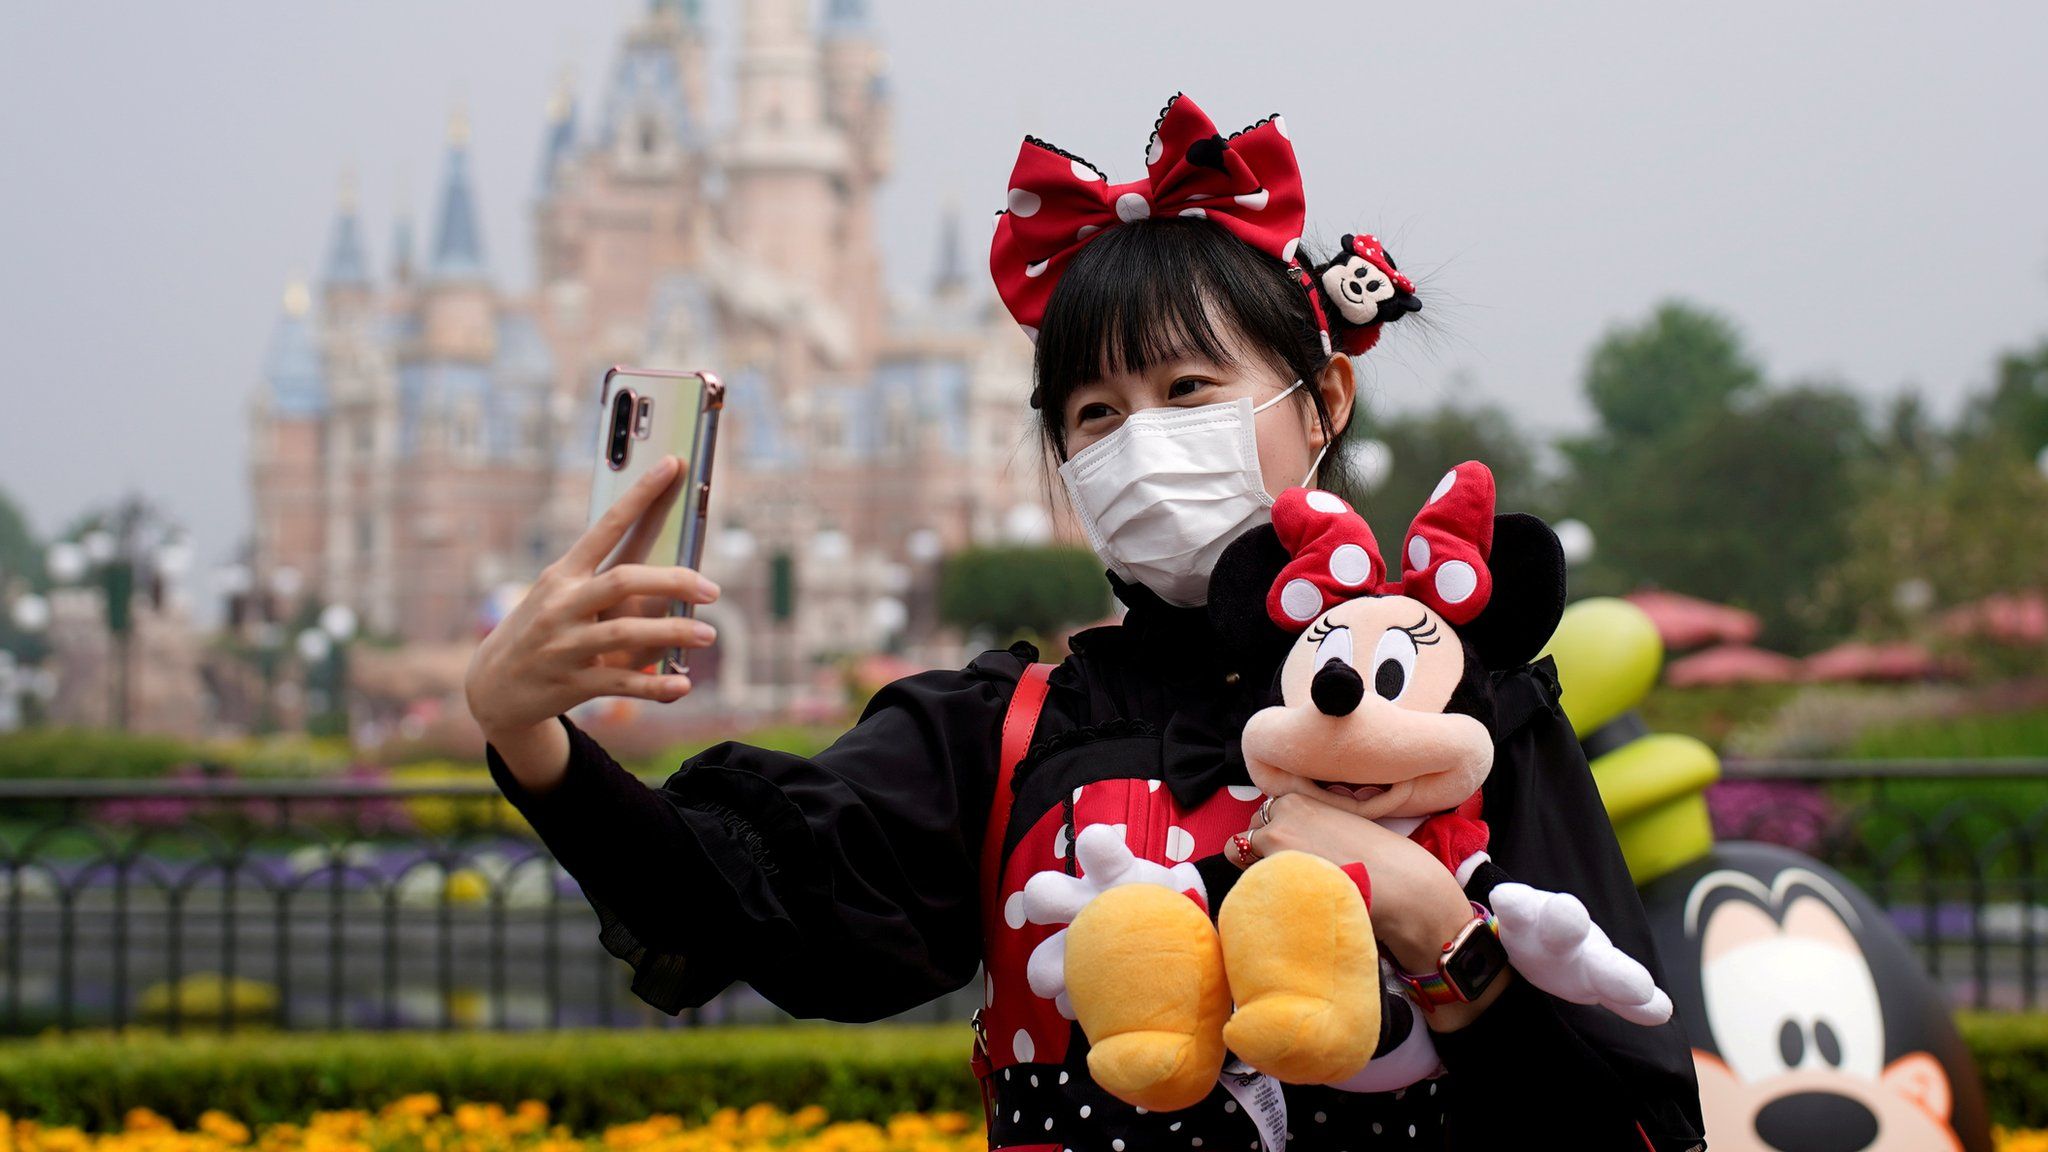 A visitor dressed as a Disney character takes a selfie while wearing a protective face mask at Shanghai Disney Resort as the Shanghai Disneyland theme park reopens following a shutdown due to the coronavirus disease (COVID-19) outbreak, in